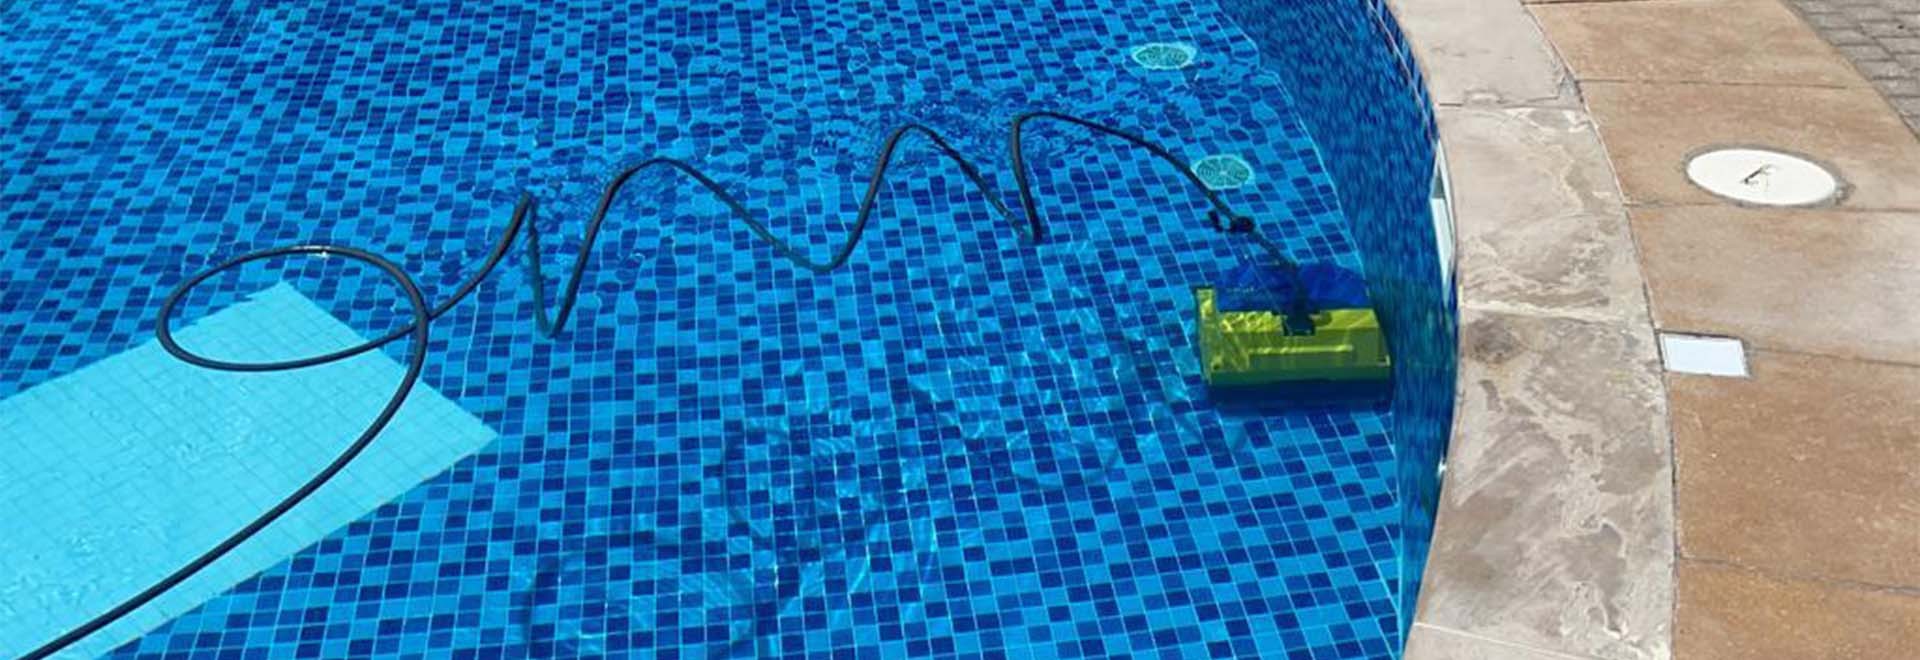 Pool Cleaning Robot Machines